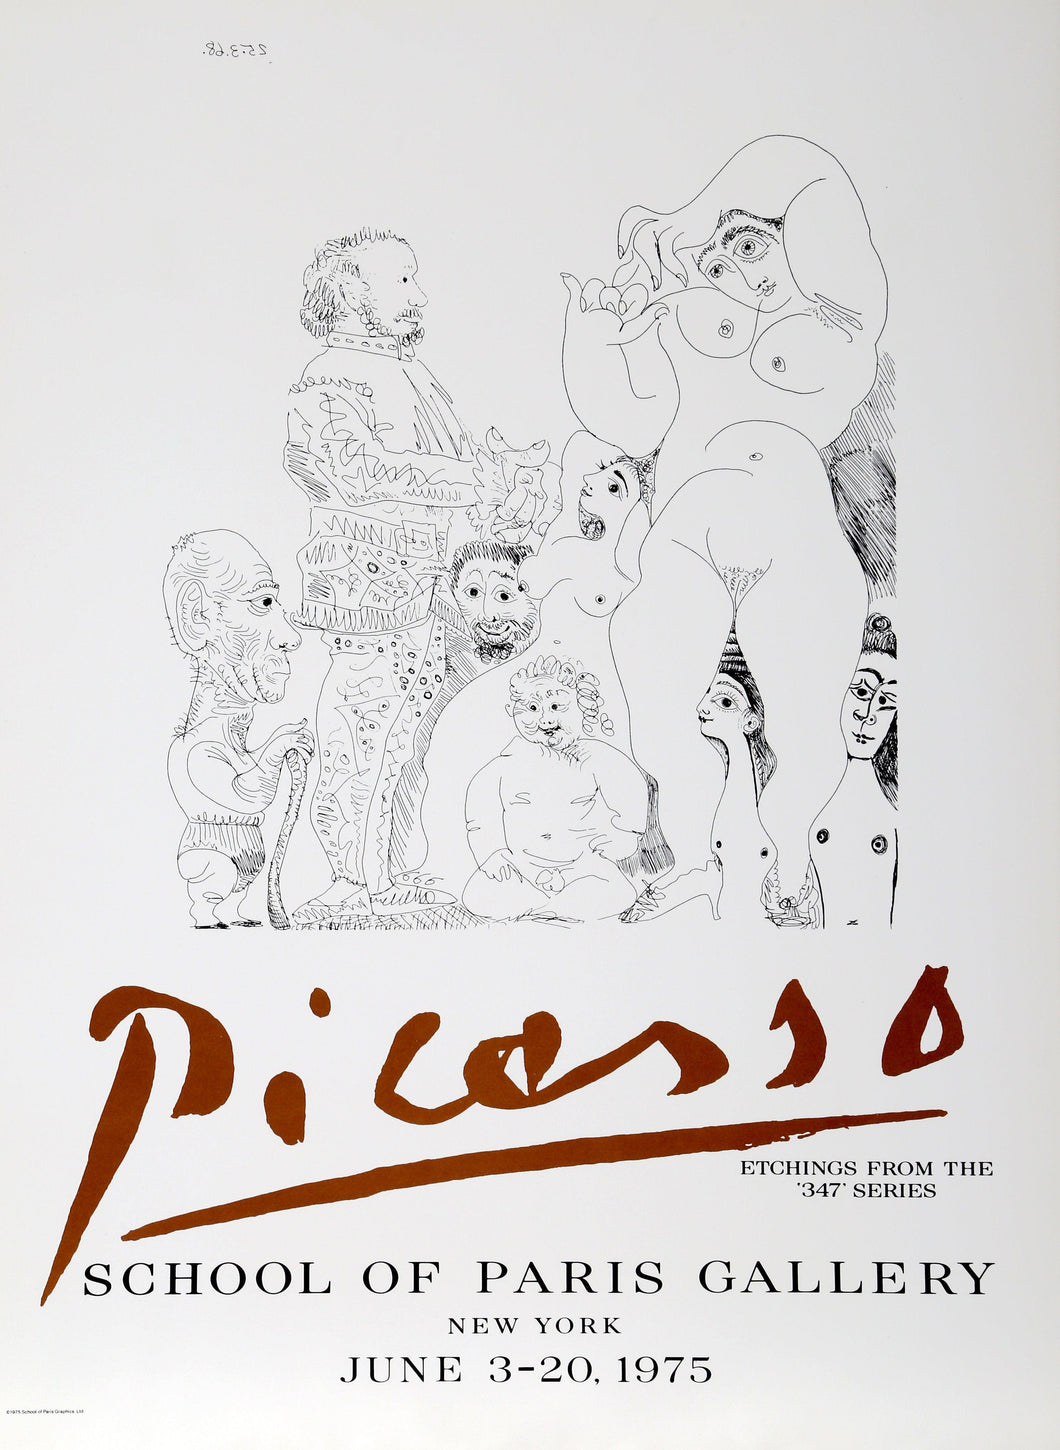 Etchings From the 347 Series -  School of Paris Gallery Poster | Pablo Picasso,{{product.type}}